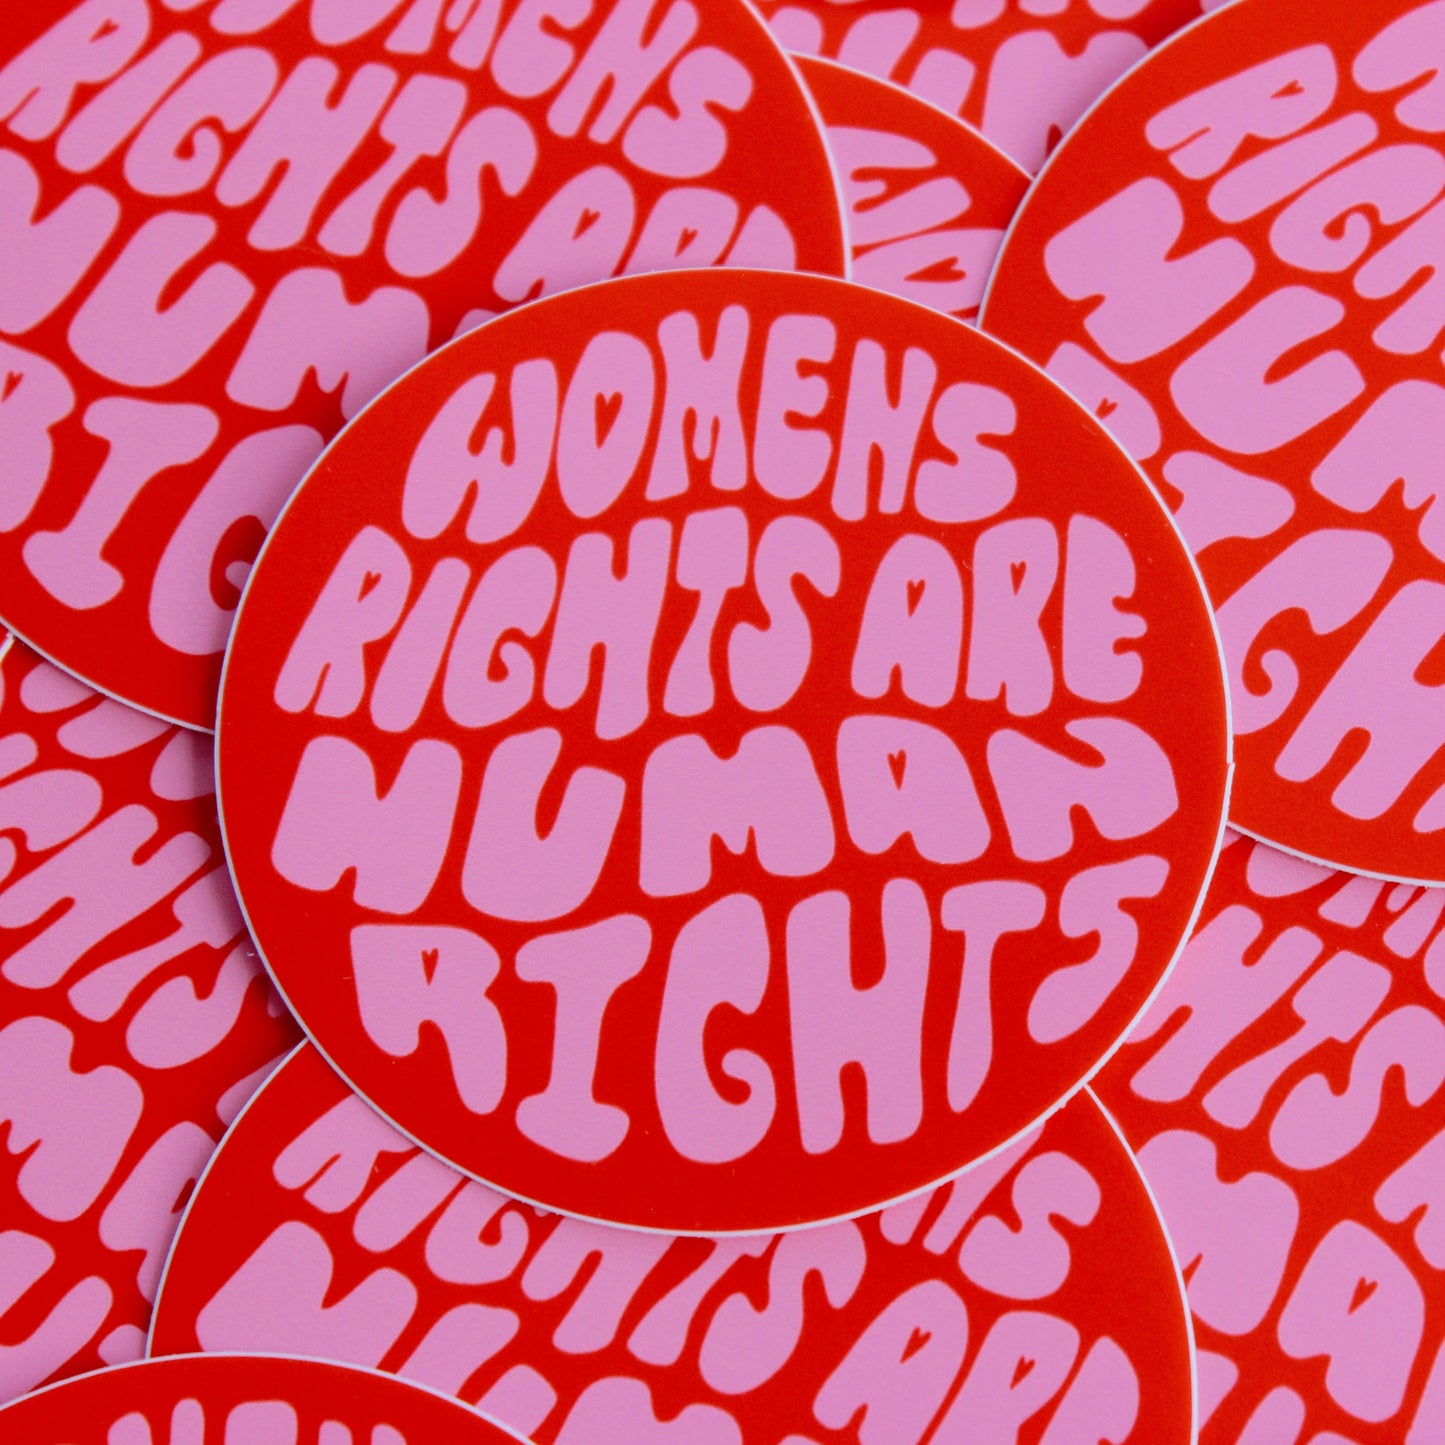 women's rights are human rights sticker